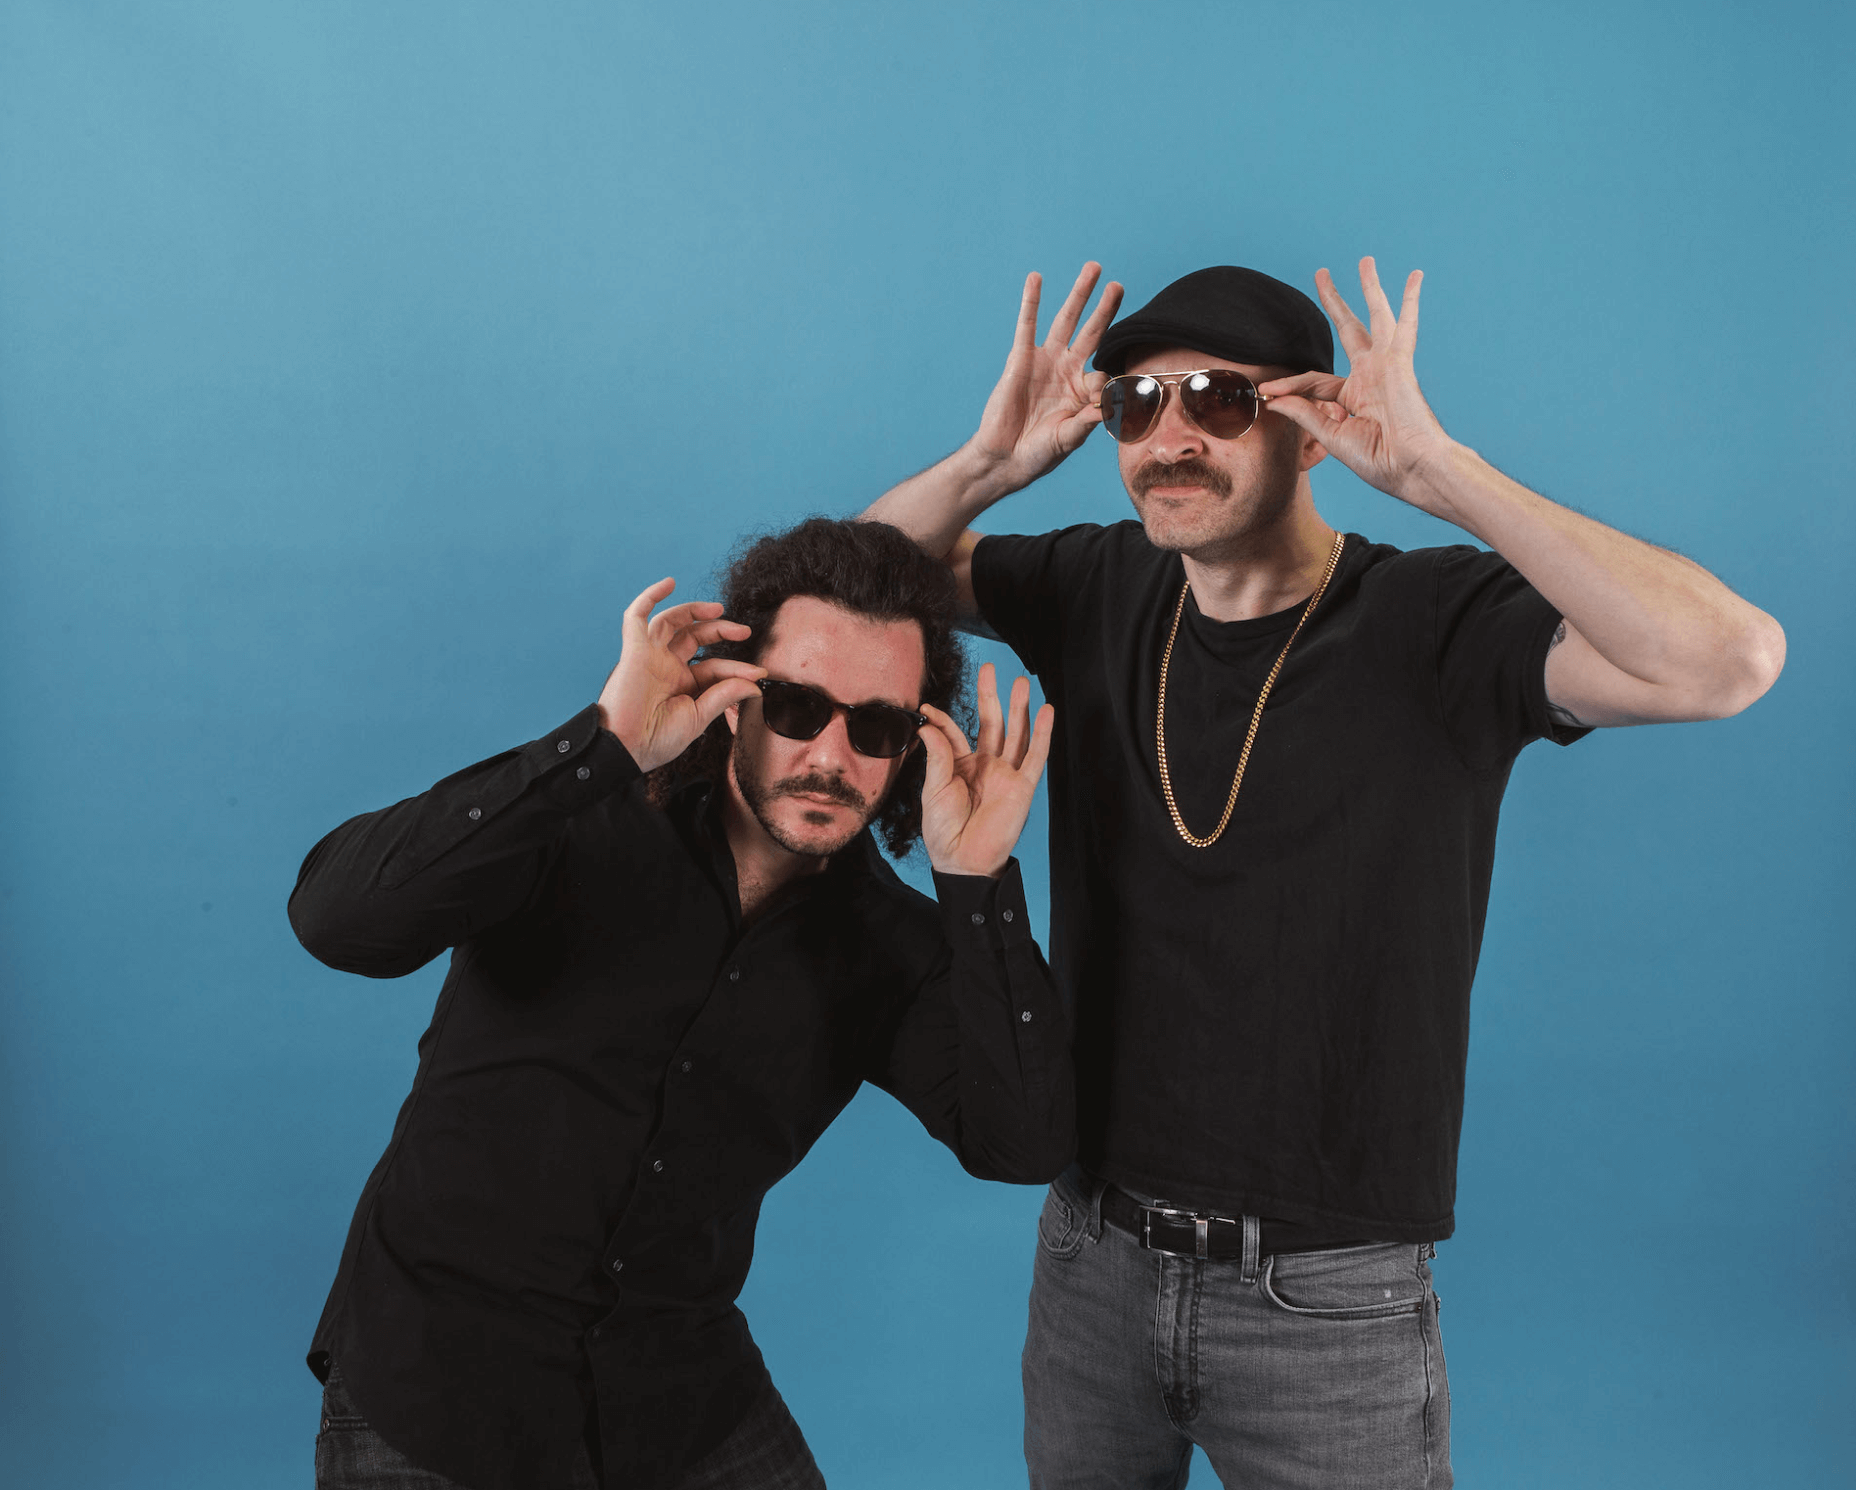 Photo of Frank and Jeff posing in black shirts with sunglasses